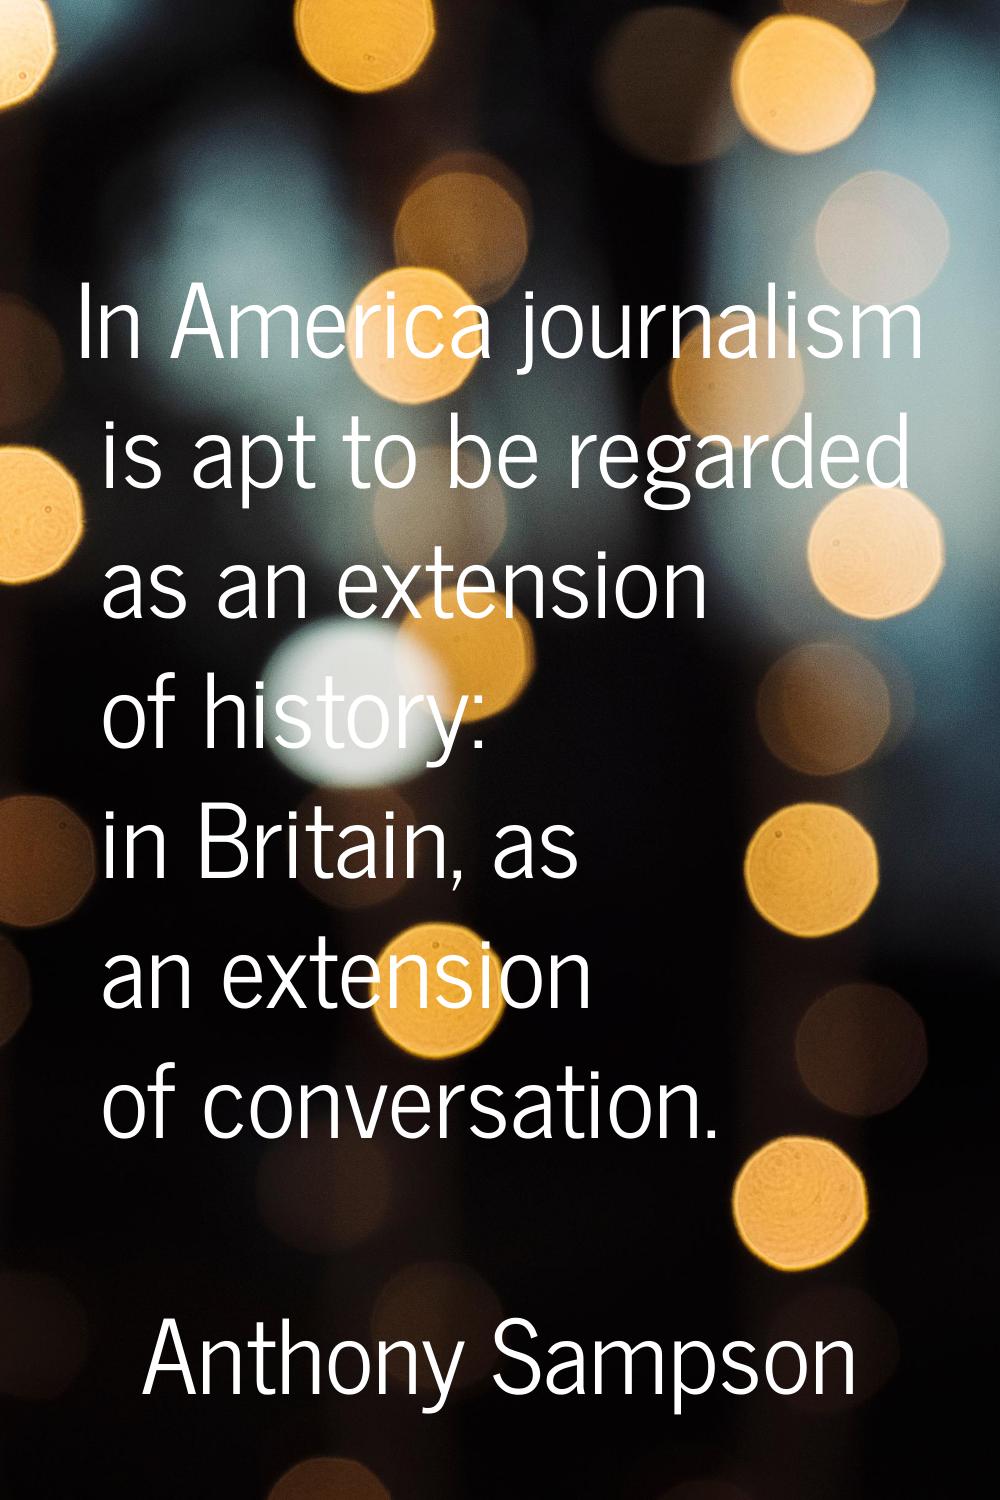 In America journalism is apt to be regarded as an extension of history: in Britain, as an extension